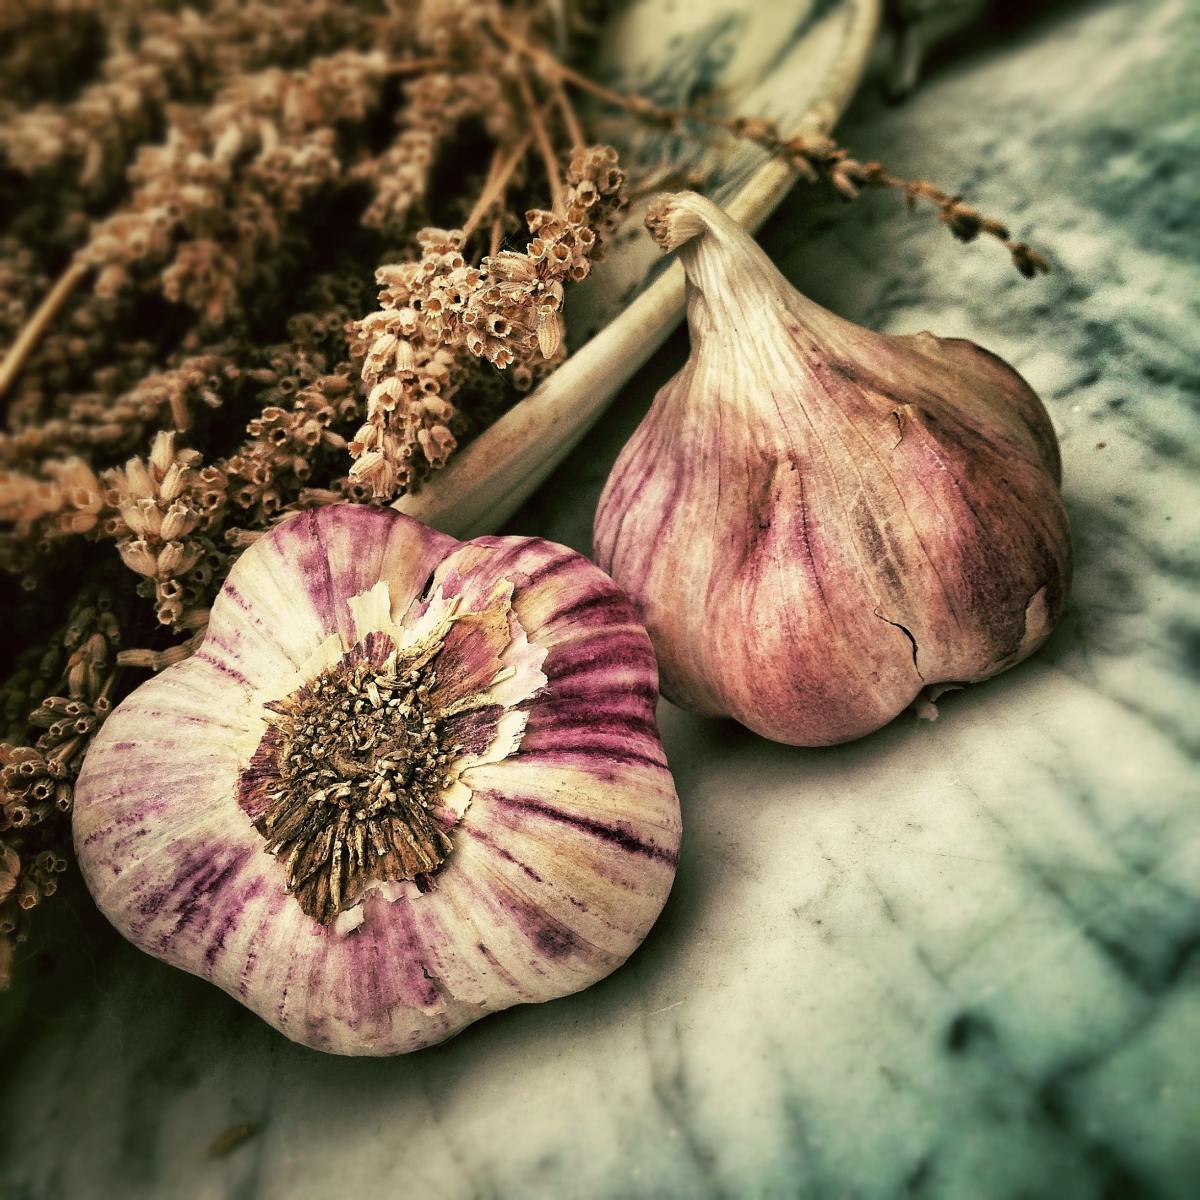 The bacteria that infect gum tissue and cause periodontal disease are reduced by the antibacterial properties of garlic.